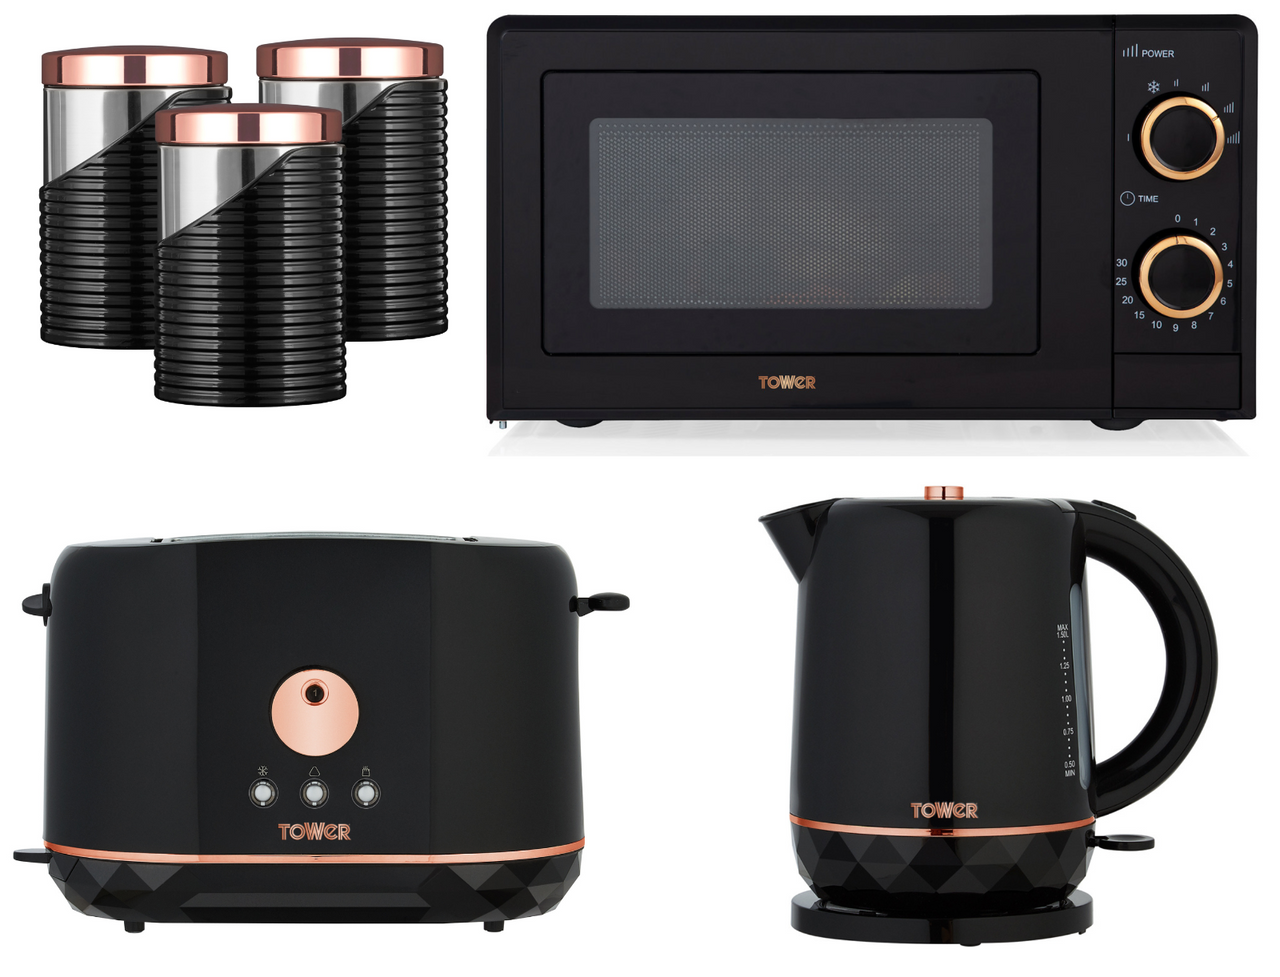 Tower Black & Rose Gold 1.5L Kettle, 2 Slice Toaster, 700w 20L Microwave & Tea, Coffee & Sugar Canisters. Matching Kitchen Set of 6